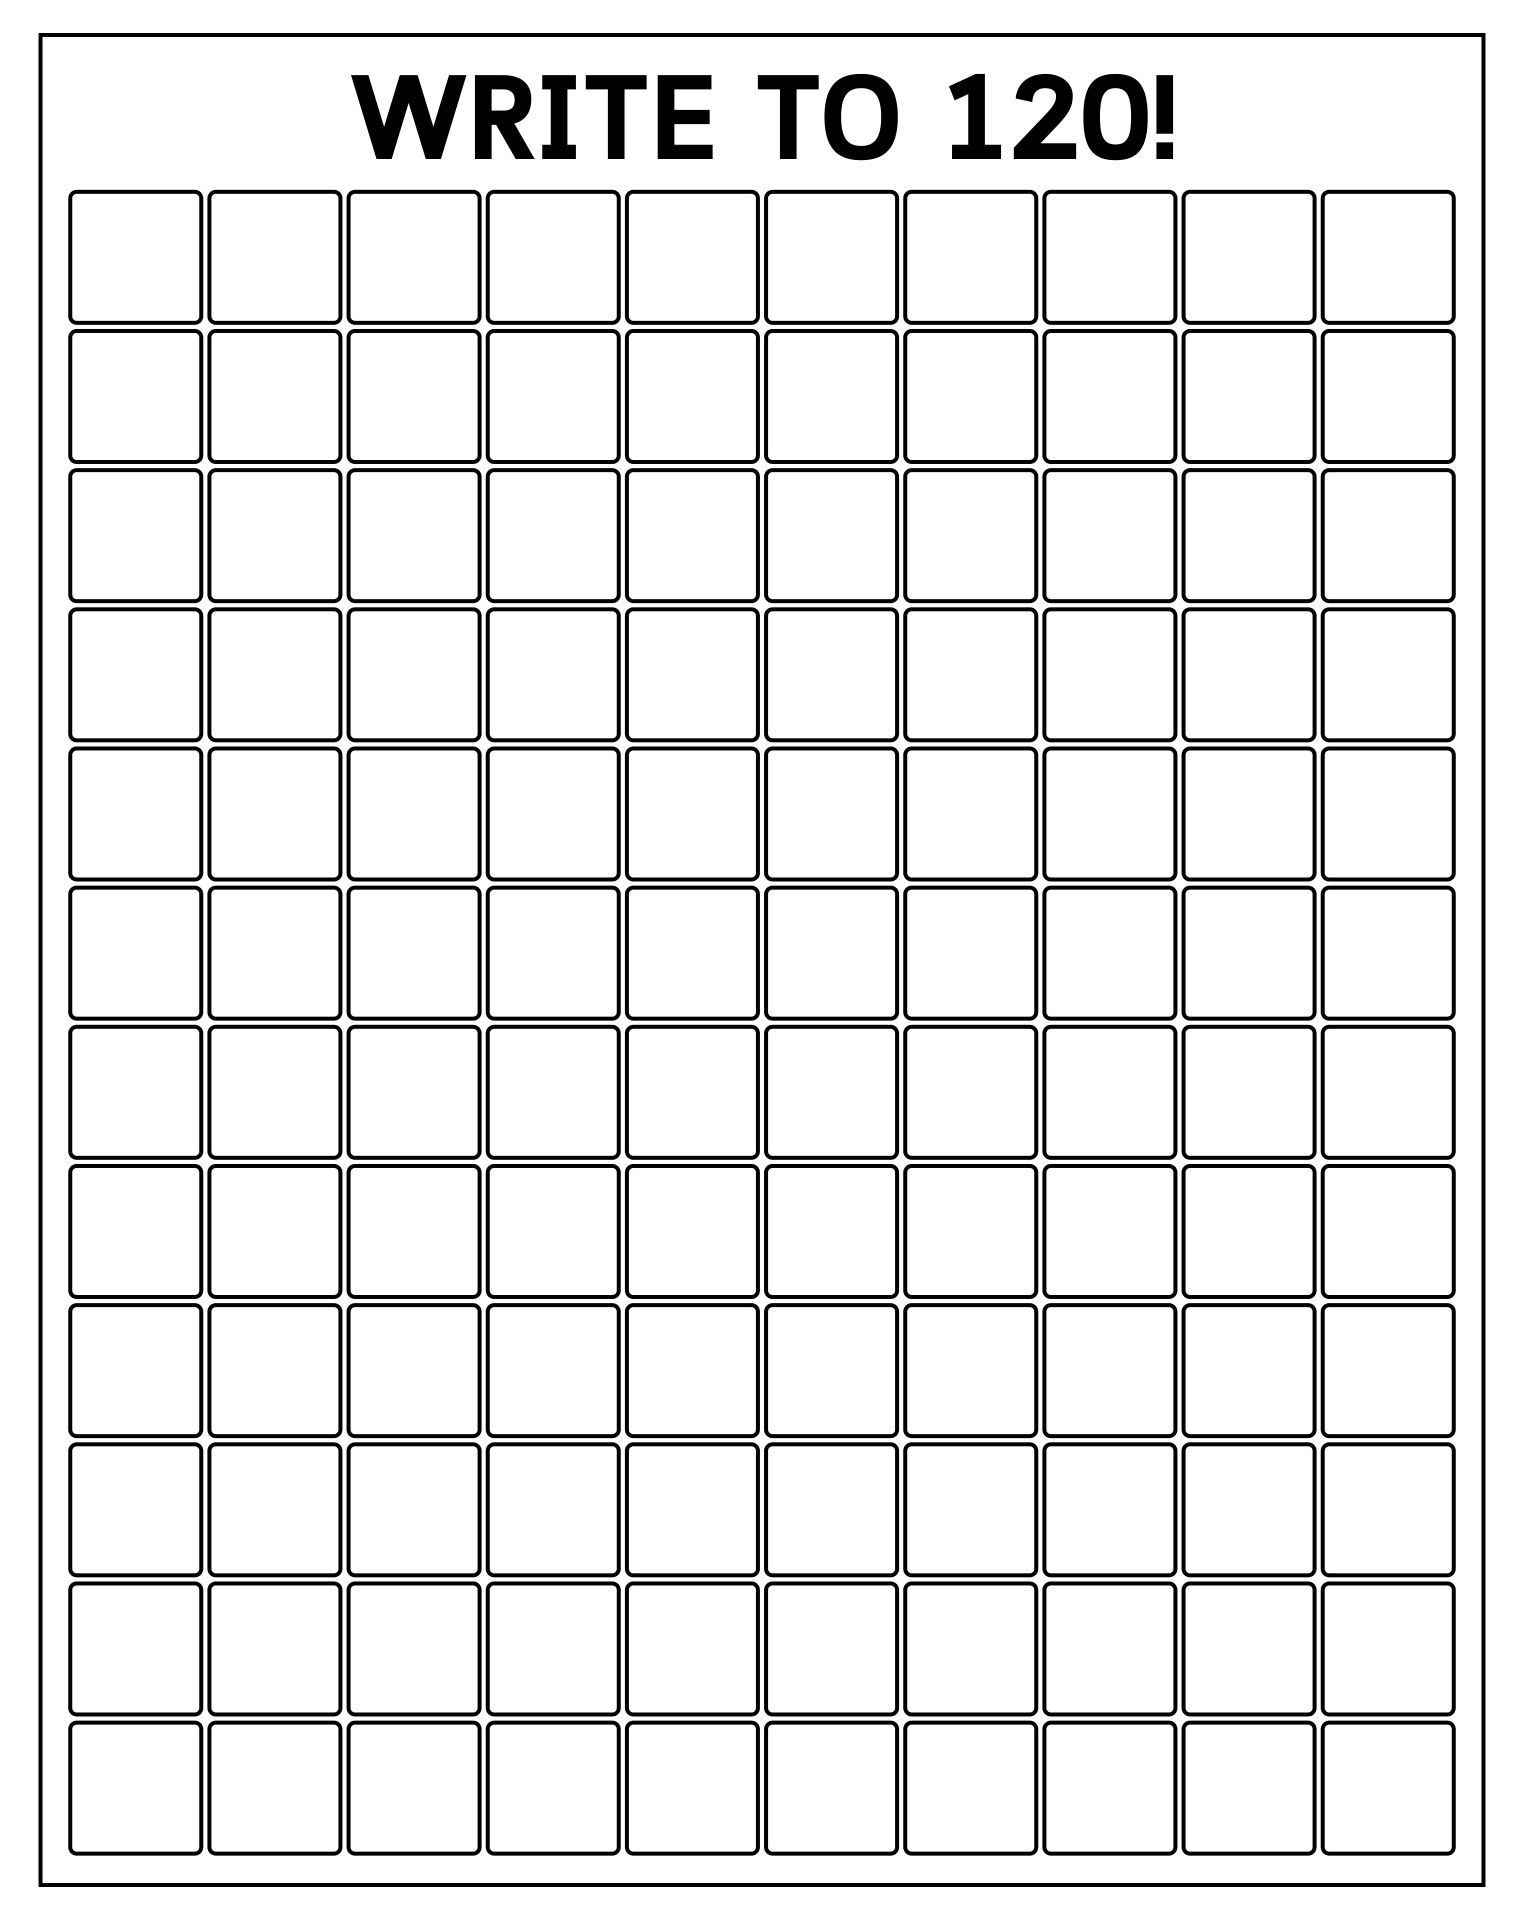 Fill In The Blank 120 Chart Printable 120 Chart Printable 120 Chart Printable Chart - Free Printable Blank 1 120 Chart